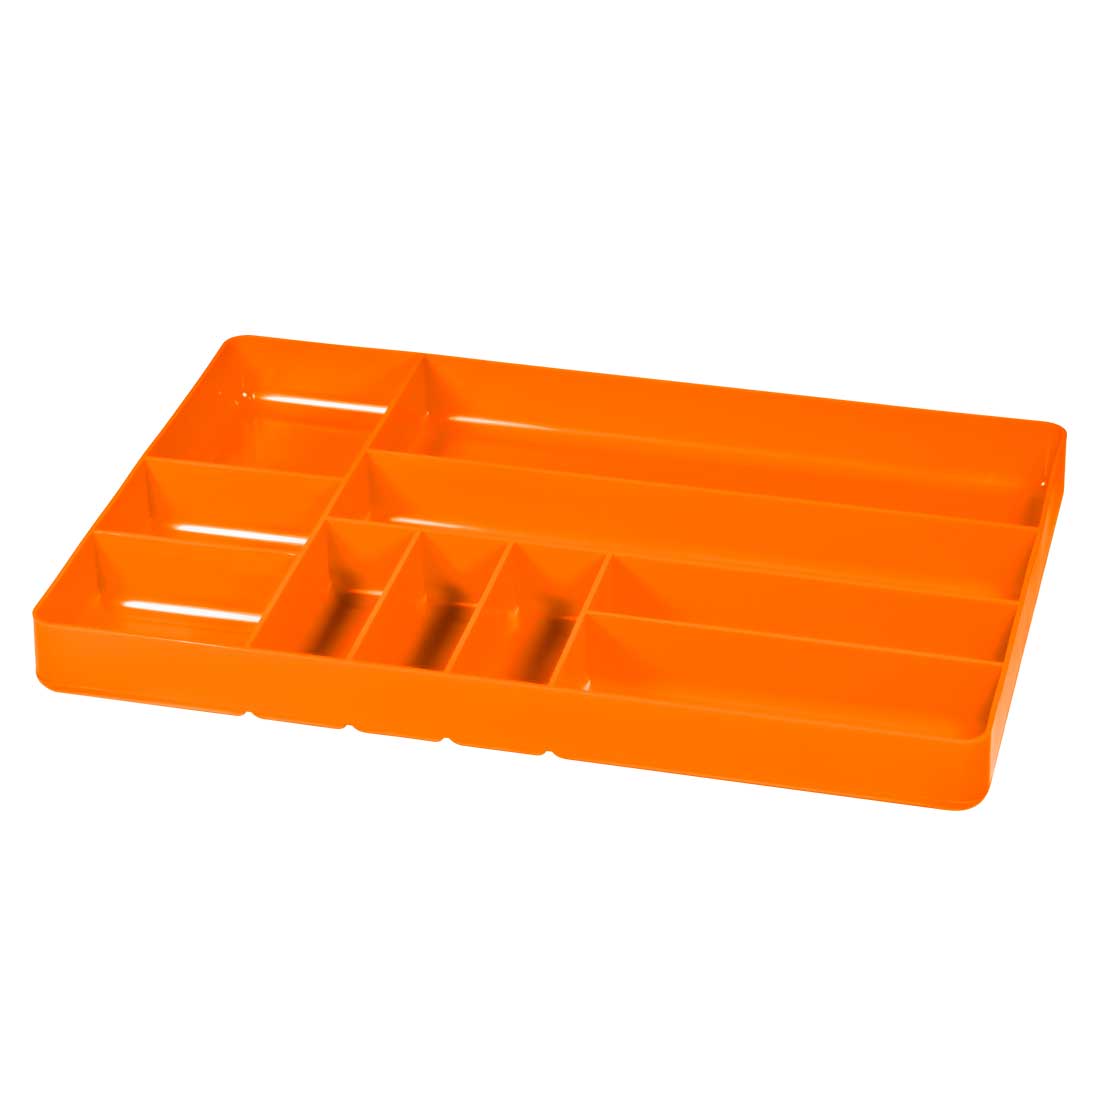 https://www.ernstrc.com/resize/Shared/Images/Product/Ten-Compartment-Organizer-Tray-Orange/5019_Ten-Compartment-Organizer-Tray_Orange_1100.jpg?bw=500&bh=500